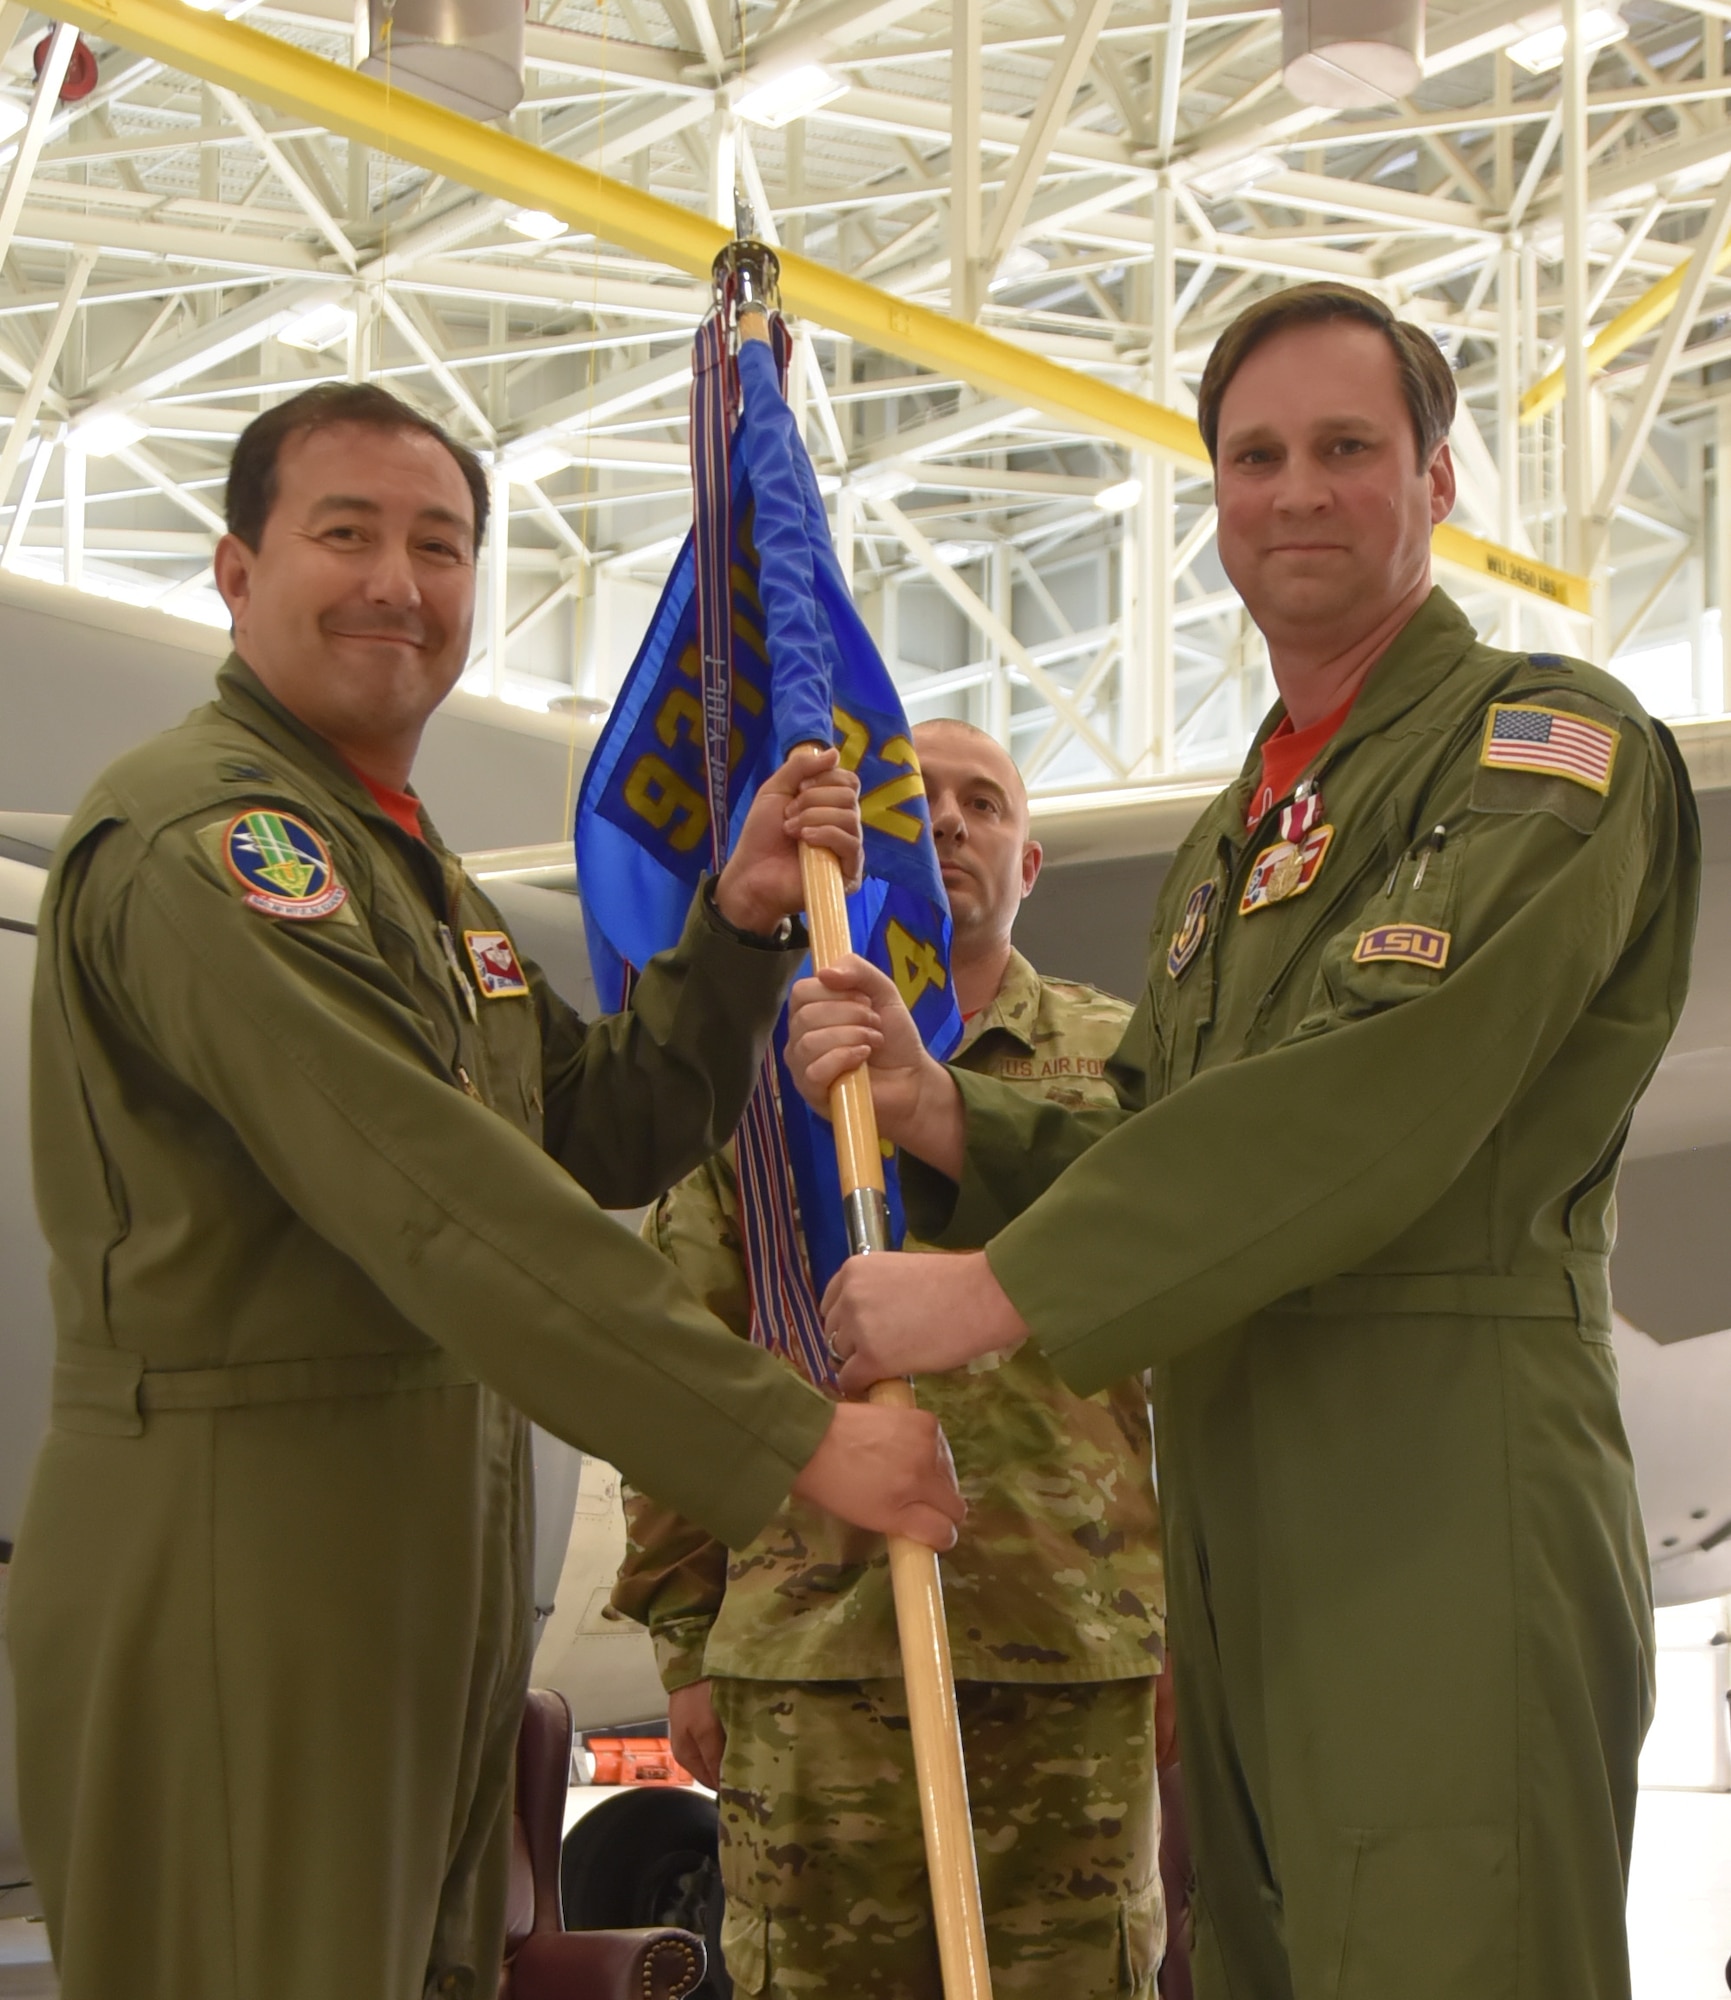 (Left to right) Col. Eric Rivero, 931st Operations Group commander, takes the guidon from Lt. Col. Scot Stewart, during an official change of command ceremony.